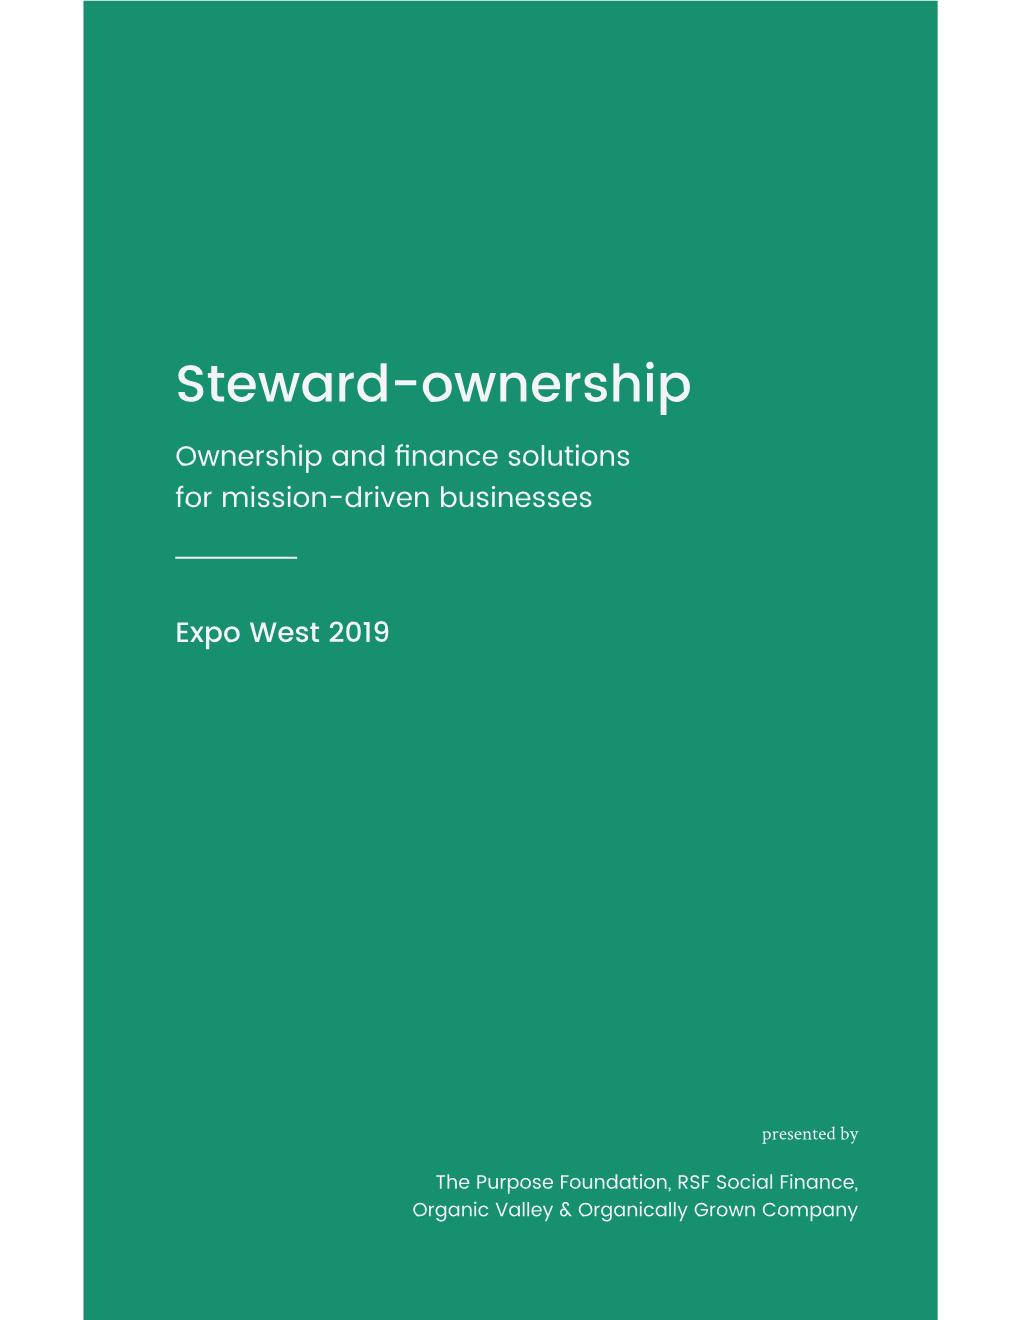 Steward-Ownership Ownership and Fnance Solutions for Mission-Driven Businesses